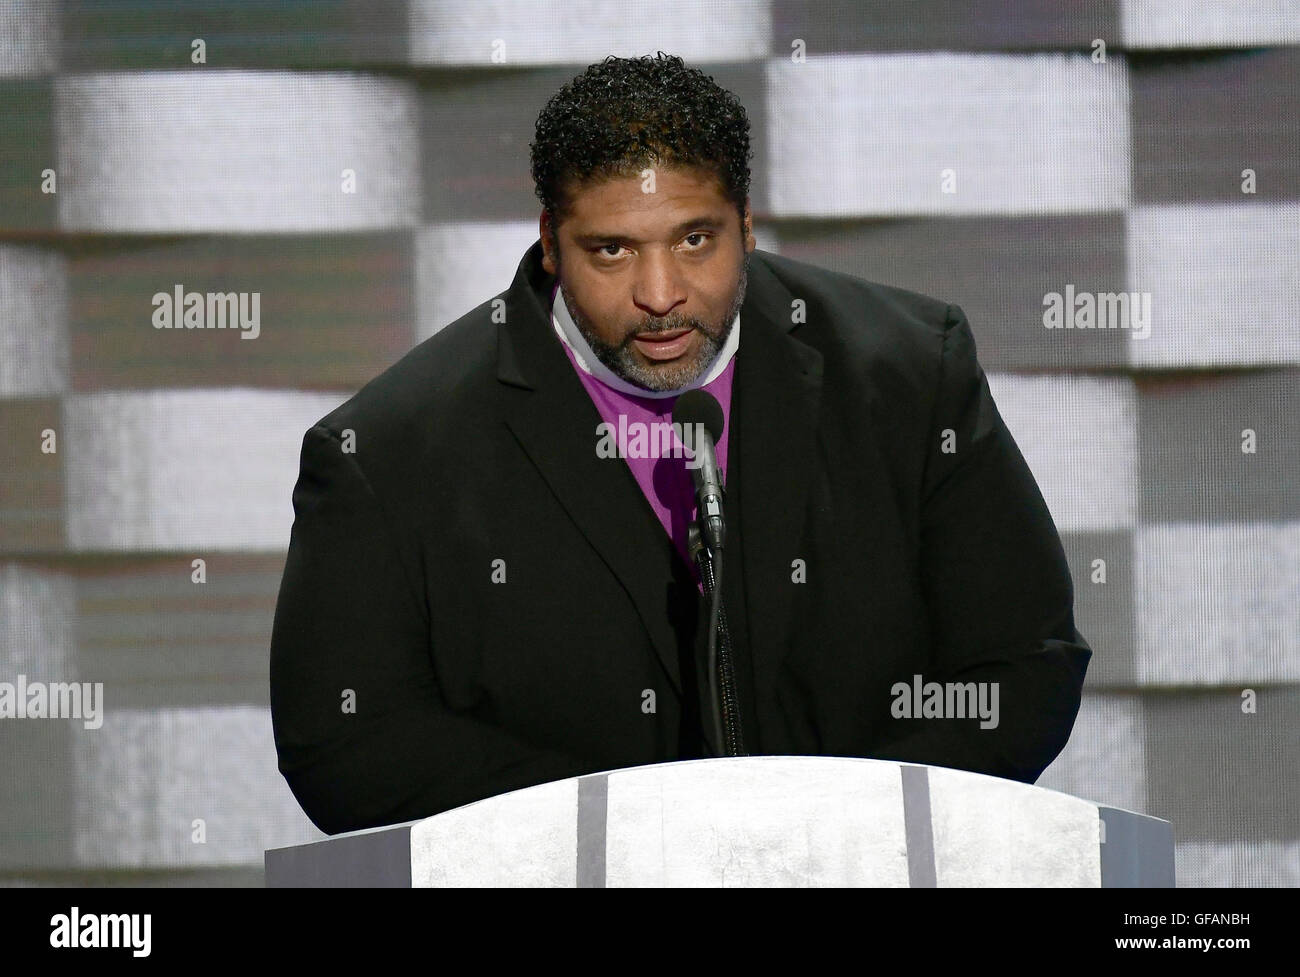 Philadelphia, Us. 28th July, 2016. Reverend Doctor William Barber II of North Carolina makes remarks during the fourth session of the 2016 Democratic National Convention at the Wells Fargo Center in Philadelphia, Pennsylvania on Thursday, July 28, 2016. Credit: Ron Sachs/CNP (RESTRICTION: NO New York or New Jersey Newspapers or newspapers within a 75 mile radius of New York City) - NO WIRE SERVICE - © dpa/Alamy Live News Stock Photo